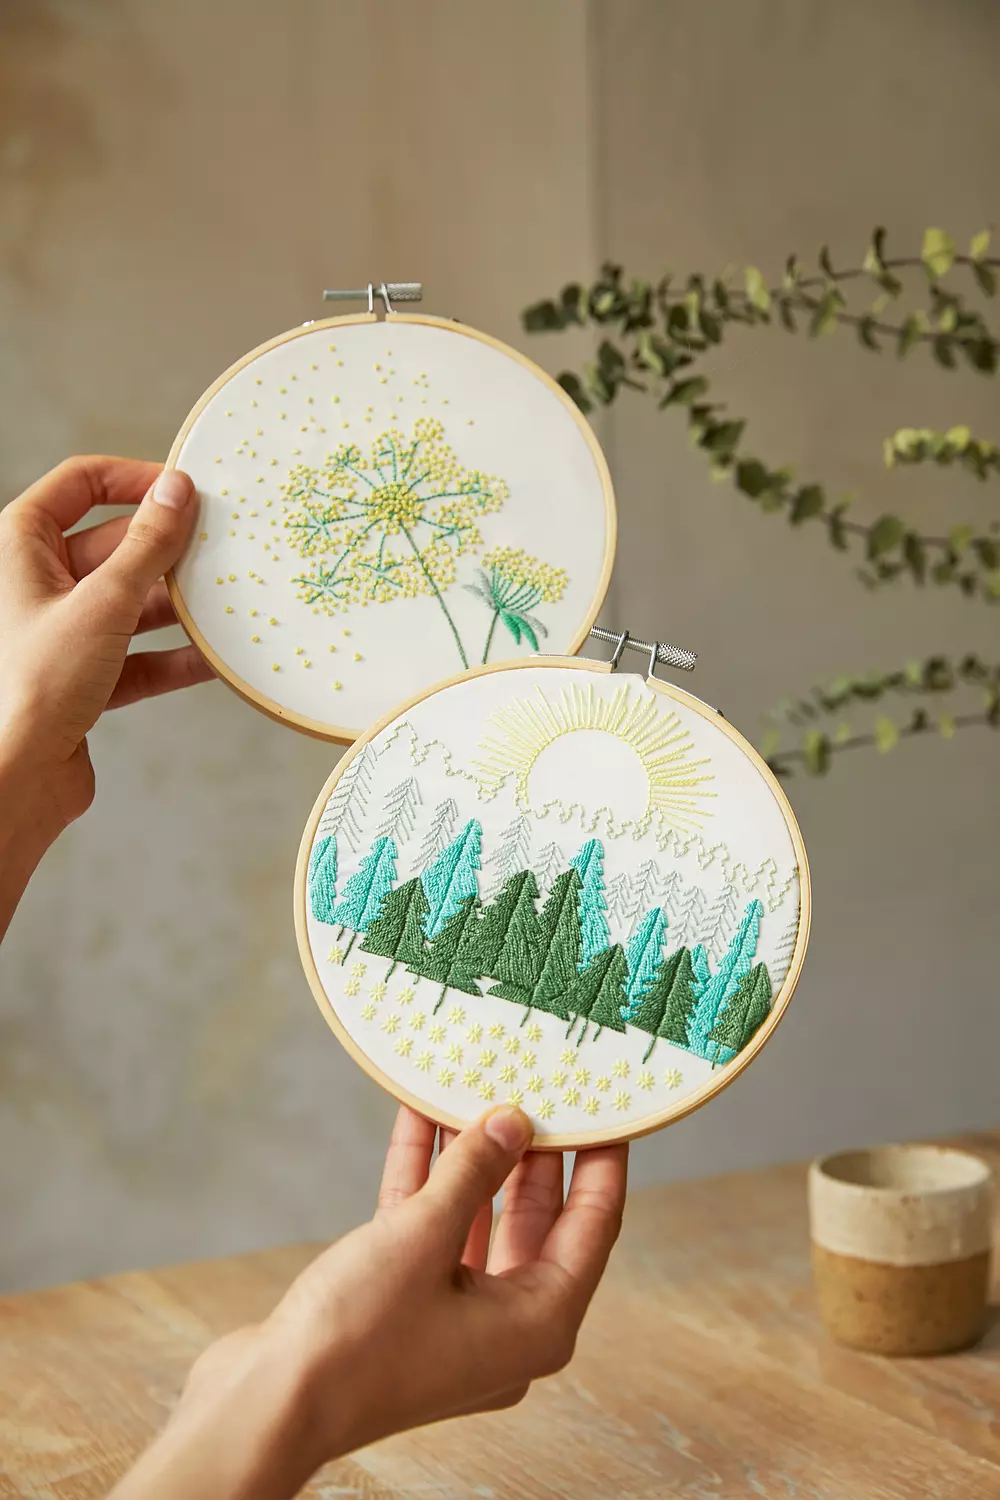 Woodland Embroidery Pattern Transfers 